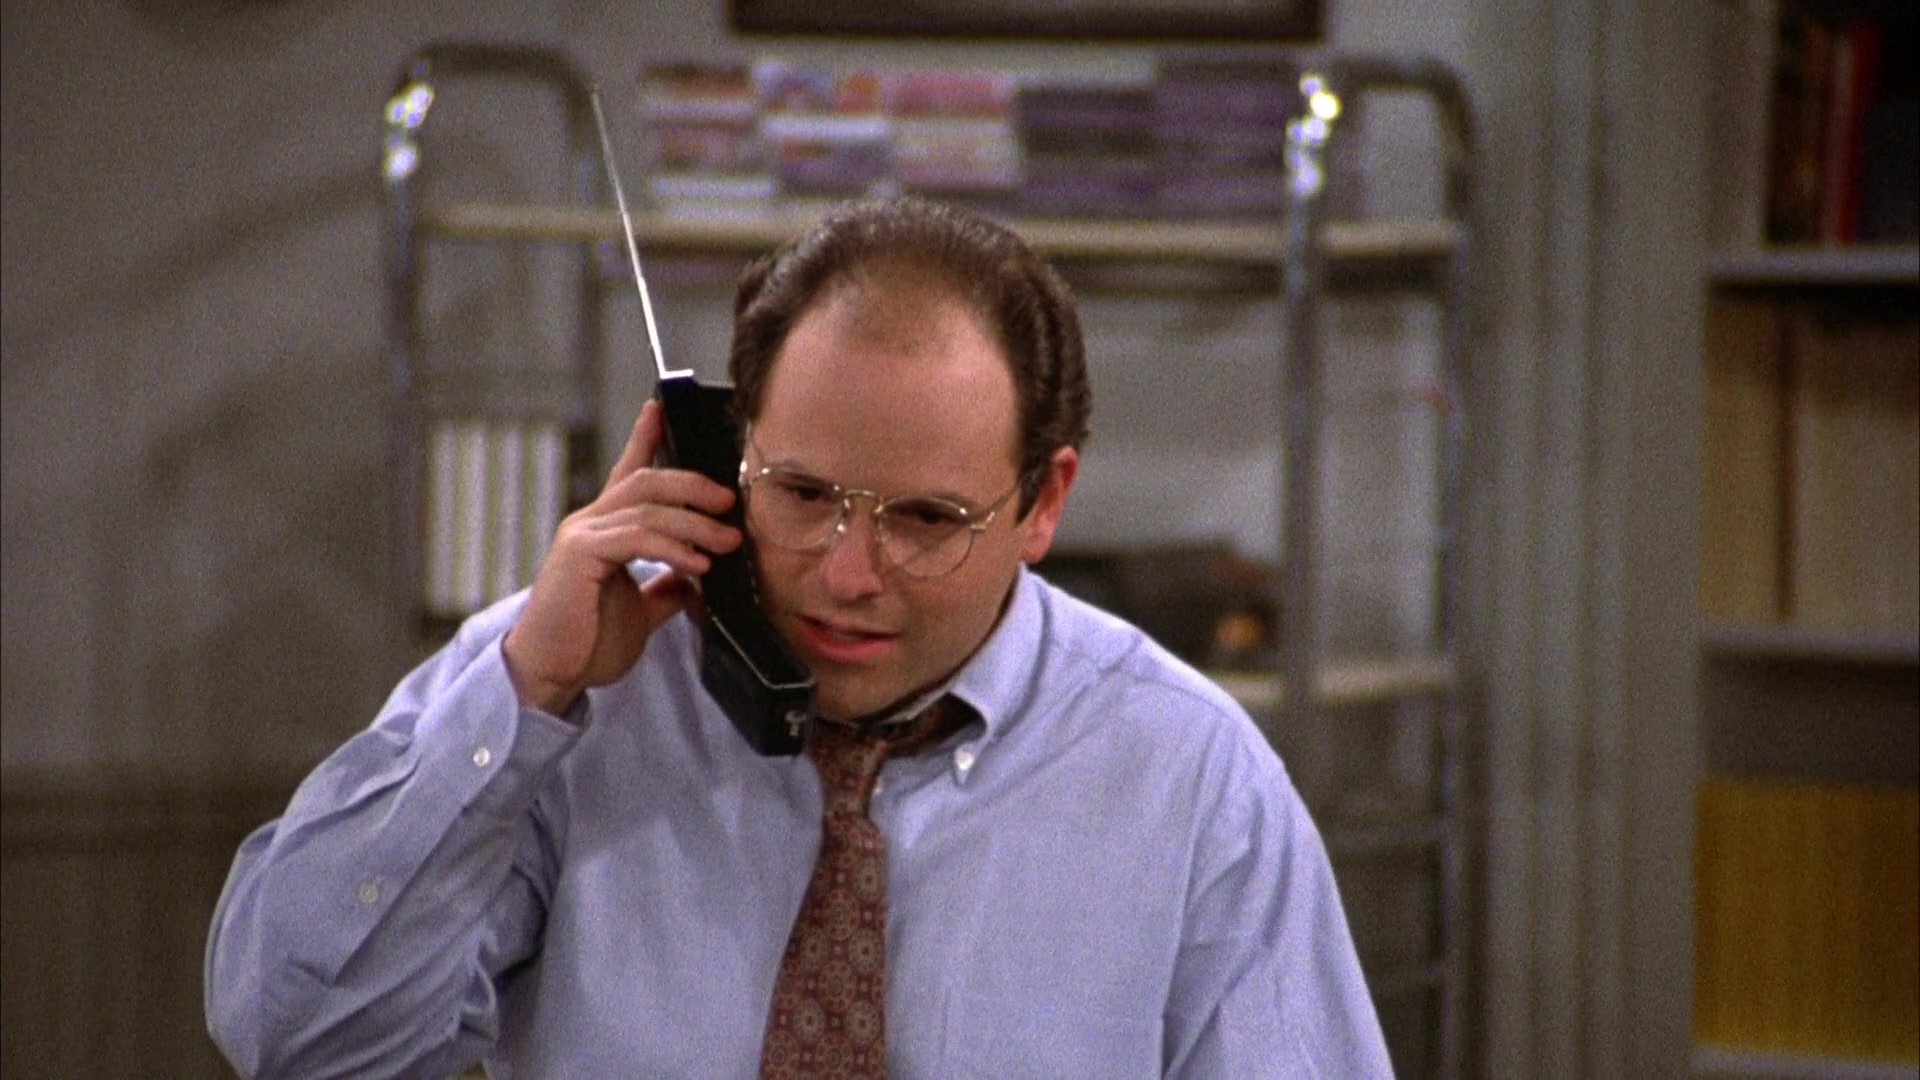 AT&T Telephone Held By Jason Alexander As George Costanza In Seinfeld Season 2 Episode 6 The Statue (1991)